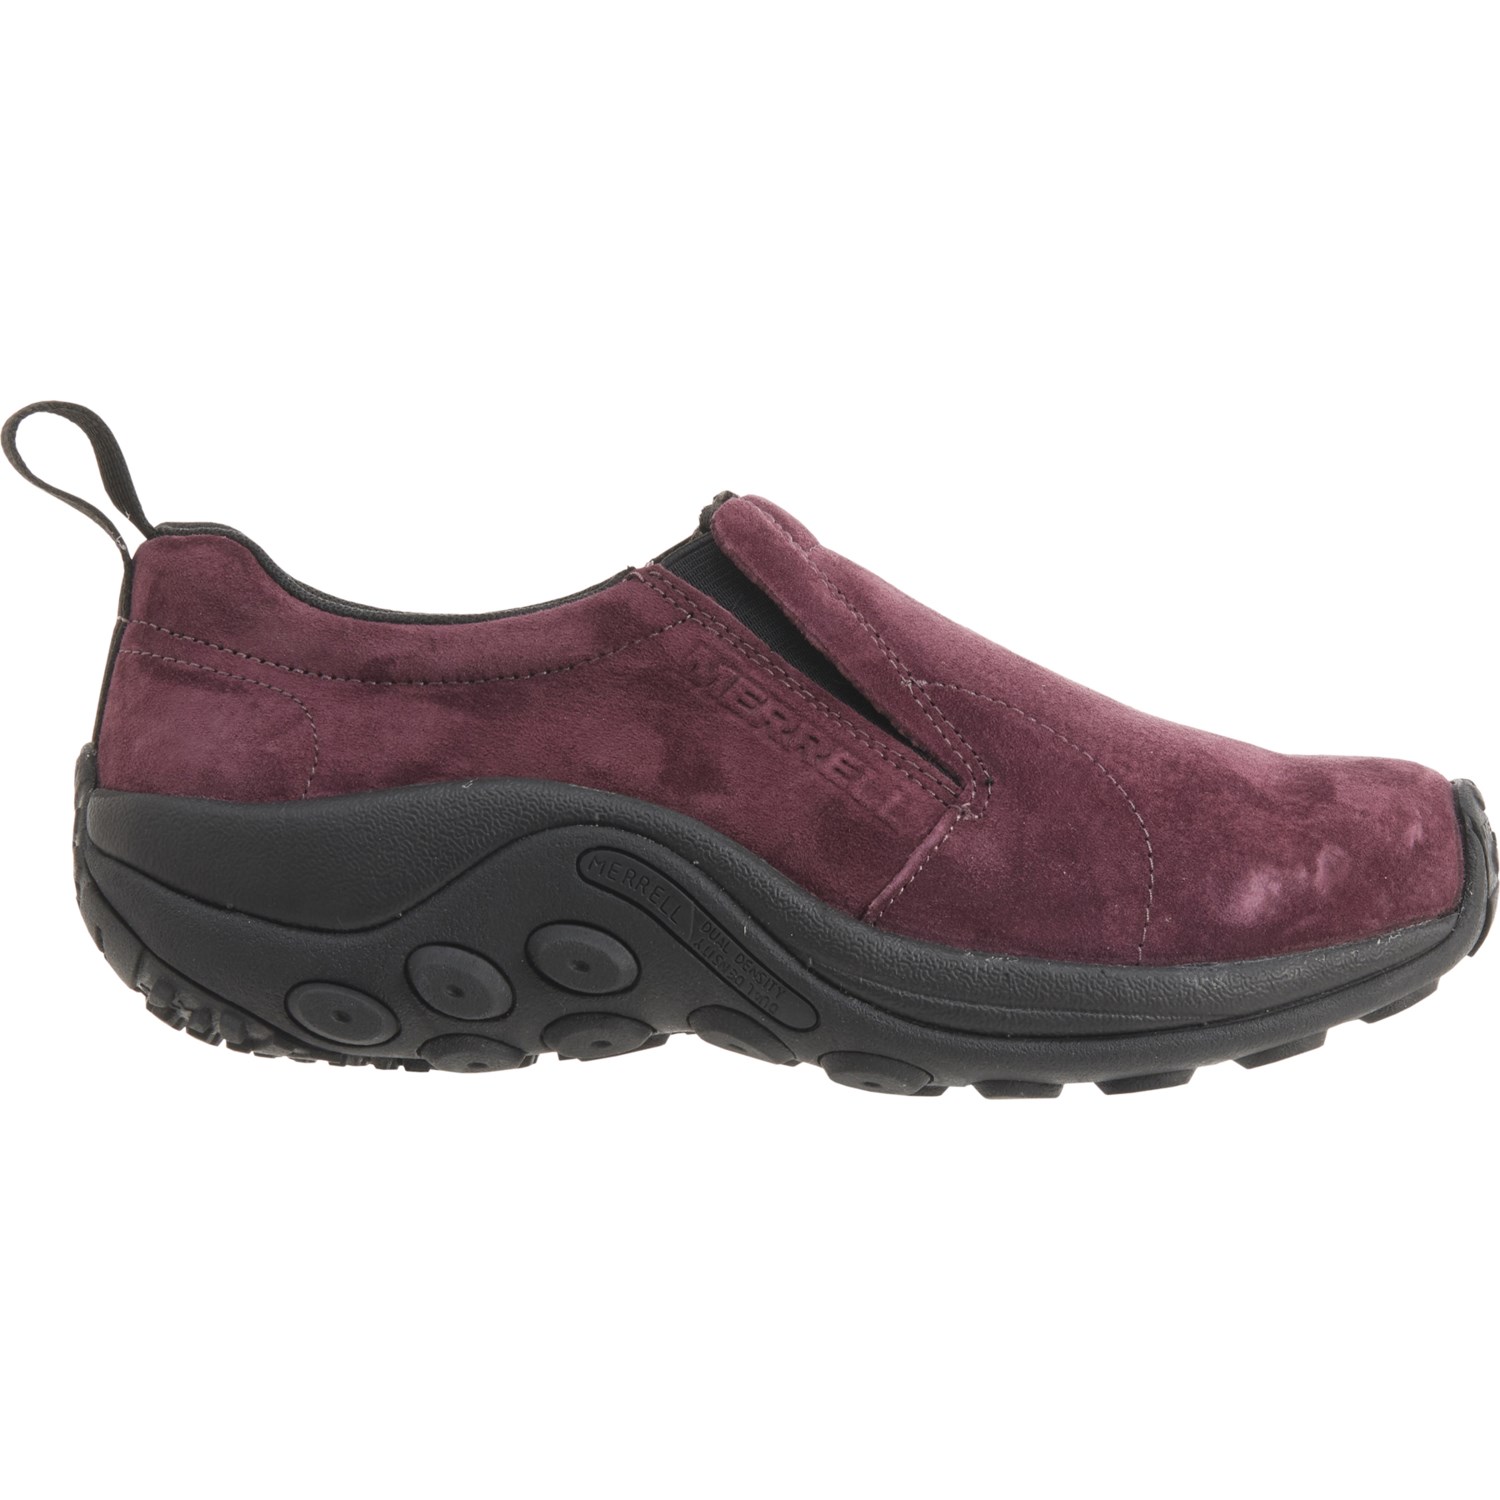 Merrell Jungle Moc Shoes (For Women) - Save 51%